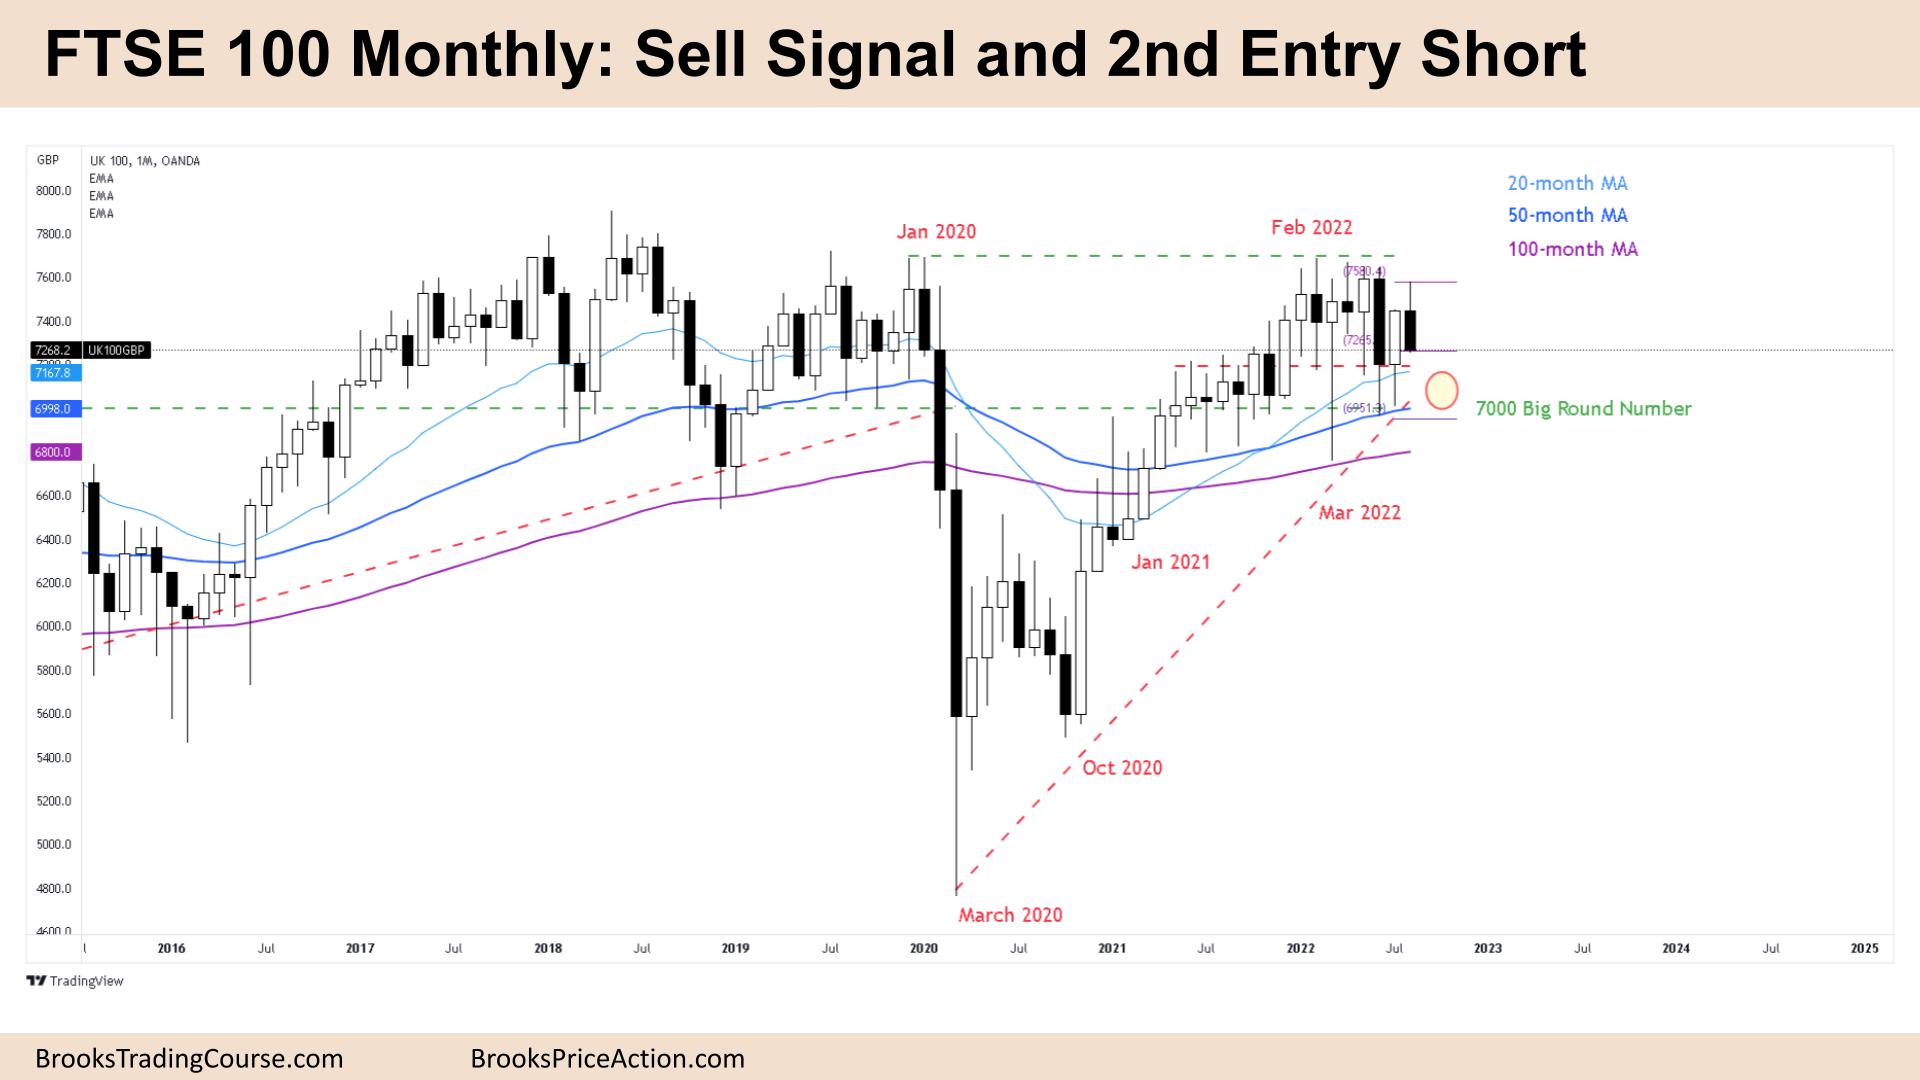 FTSE 100 Monthly Sell Signal and 2nd Entry Short